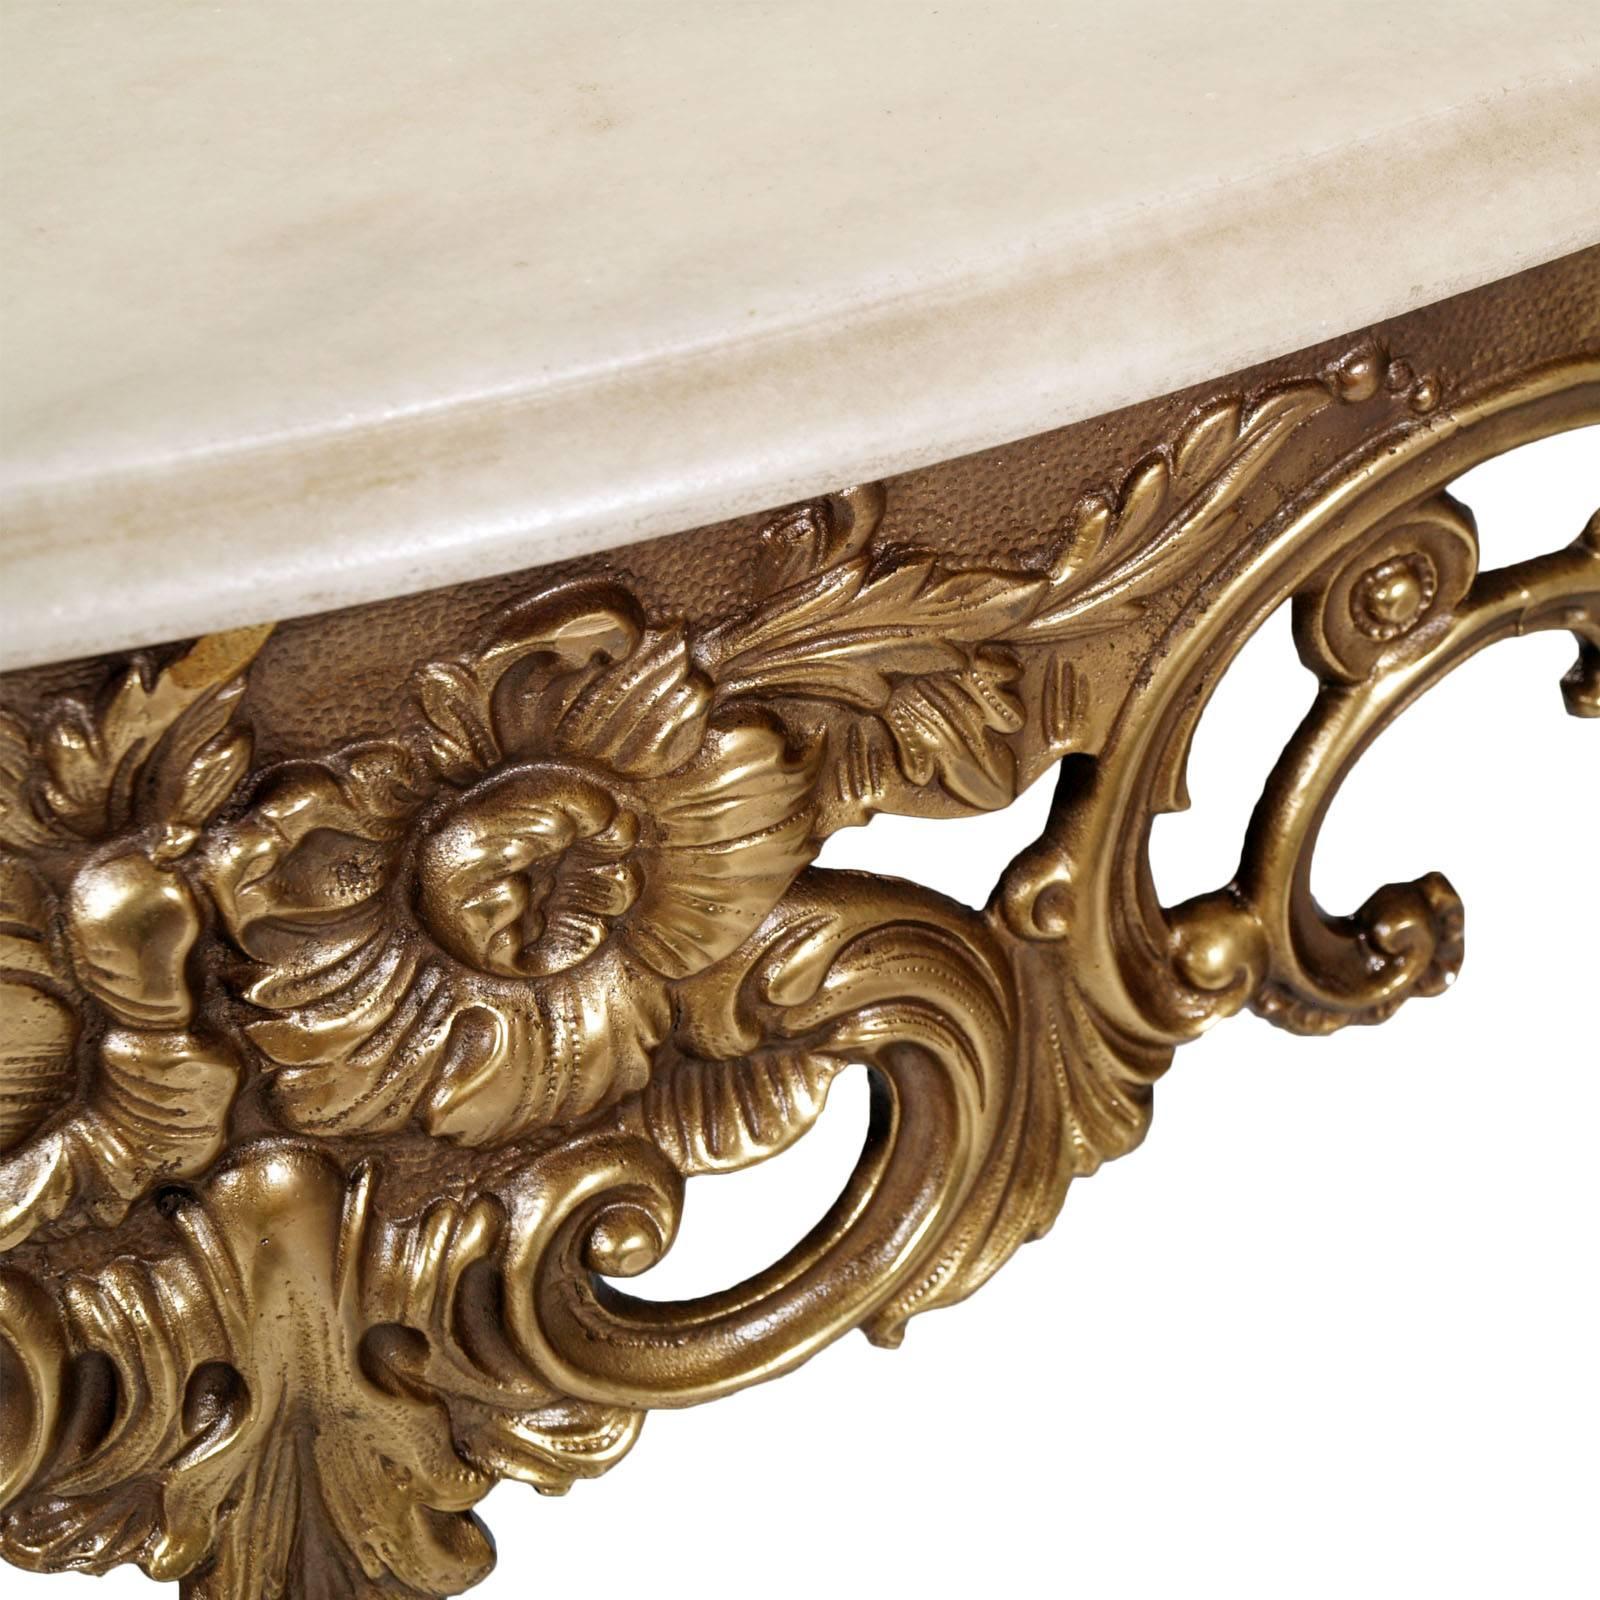 Burnished Early 20th Century Venetian Rococo Gilt Bronze Console, V. Cadorin Manner